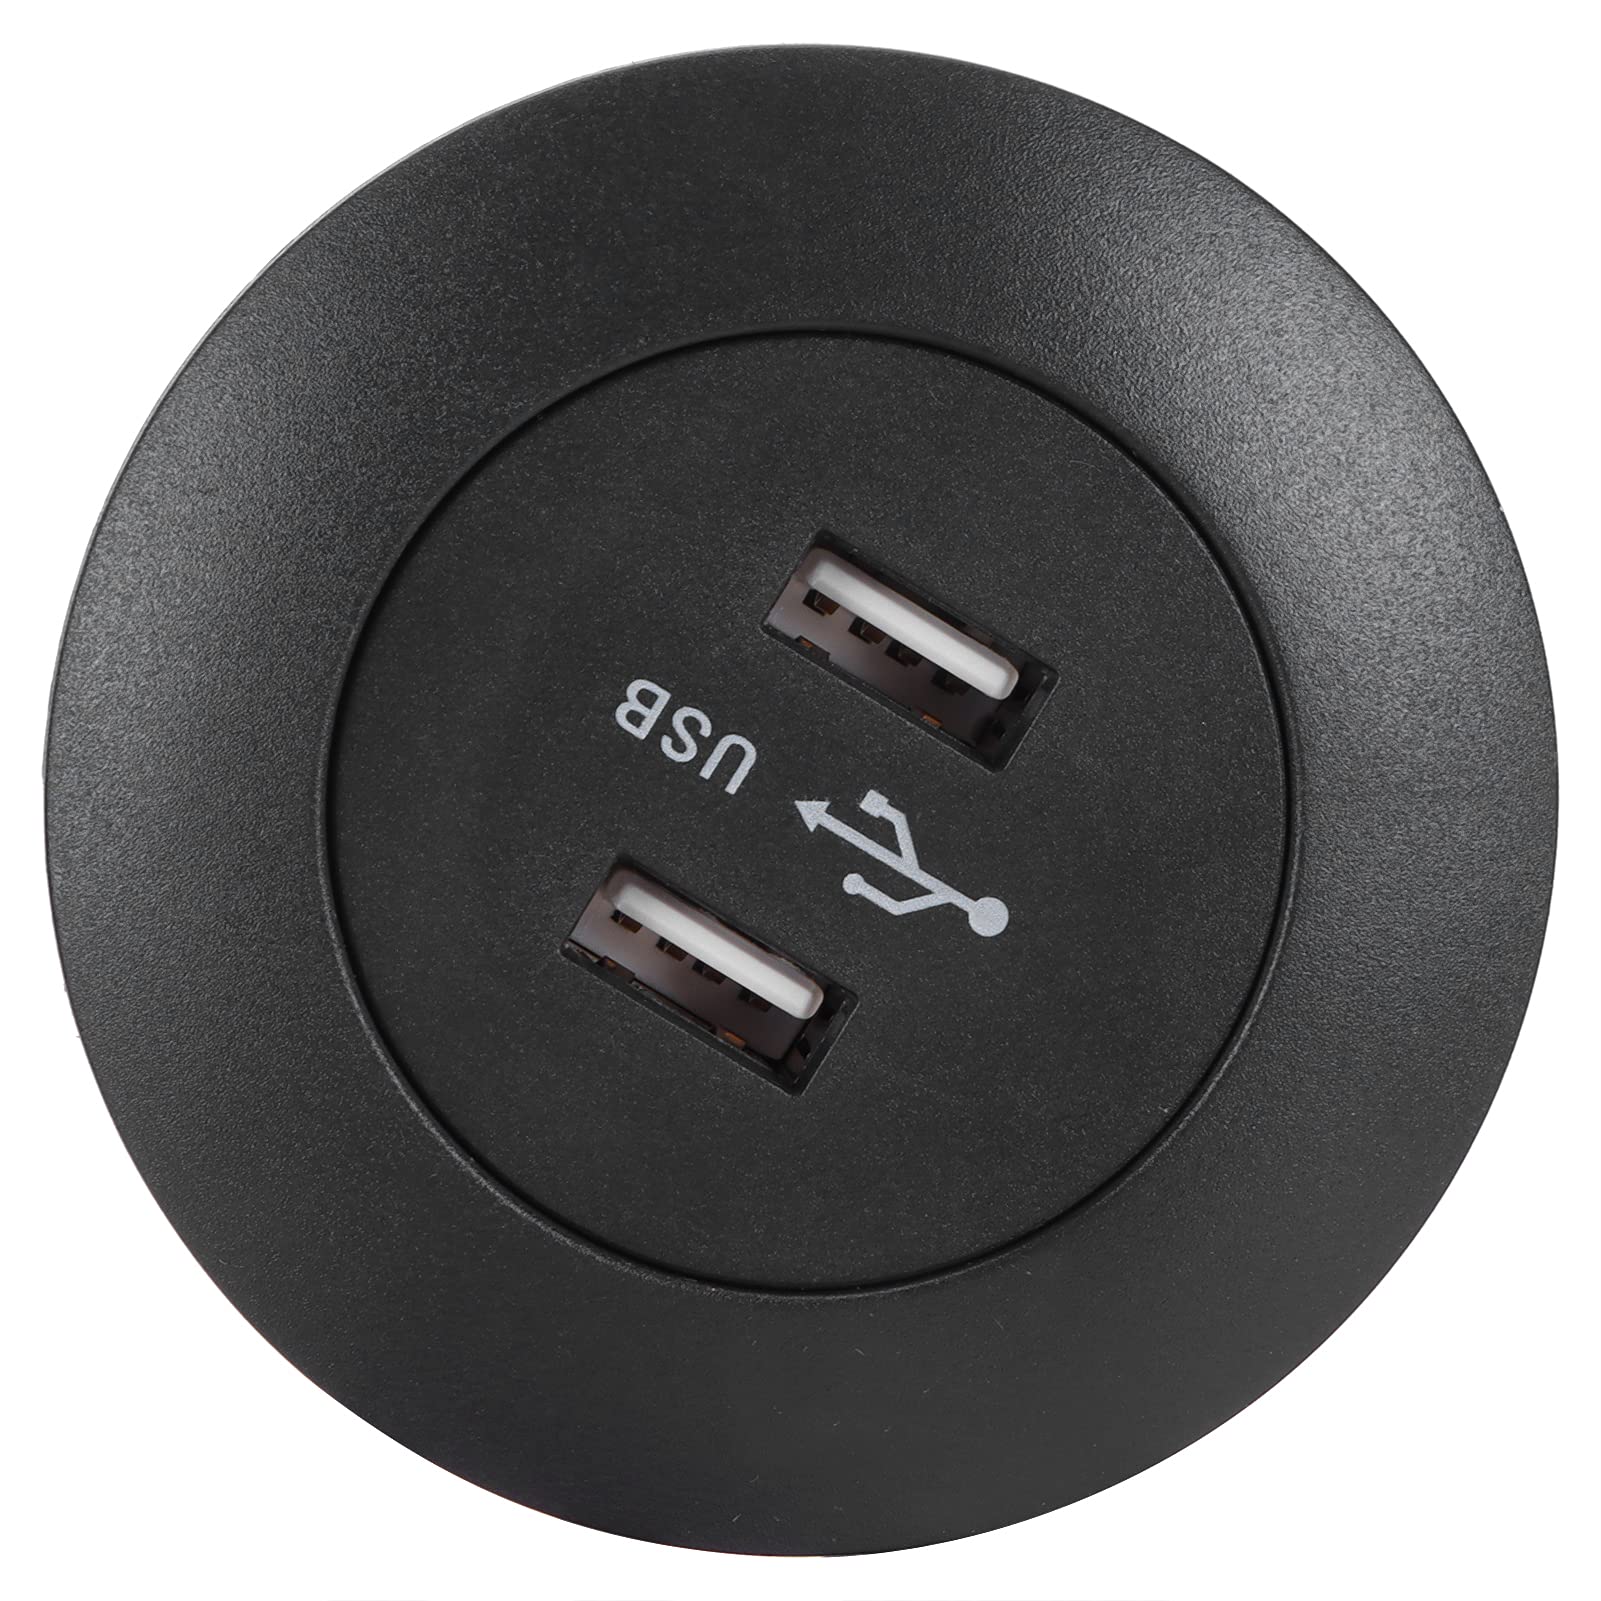 Dual USB Socket, Electric Recliner Chair Sofa Replacement Button Round Dual USB Charging Interface Smart Home (US Plug-black)